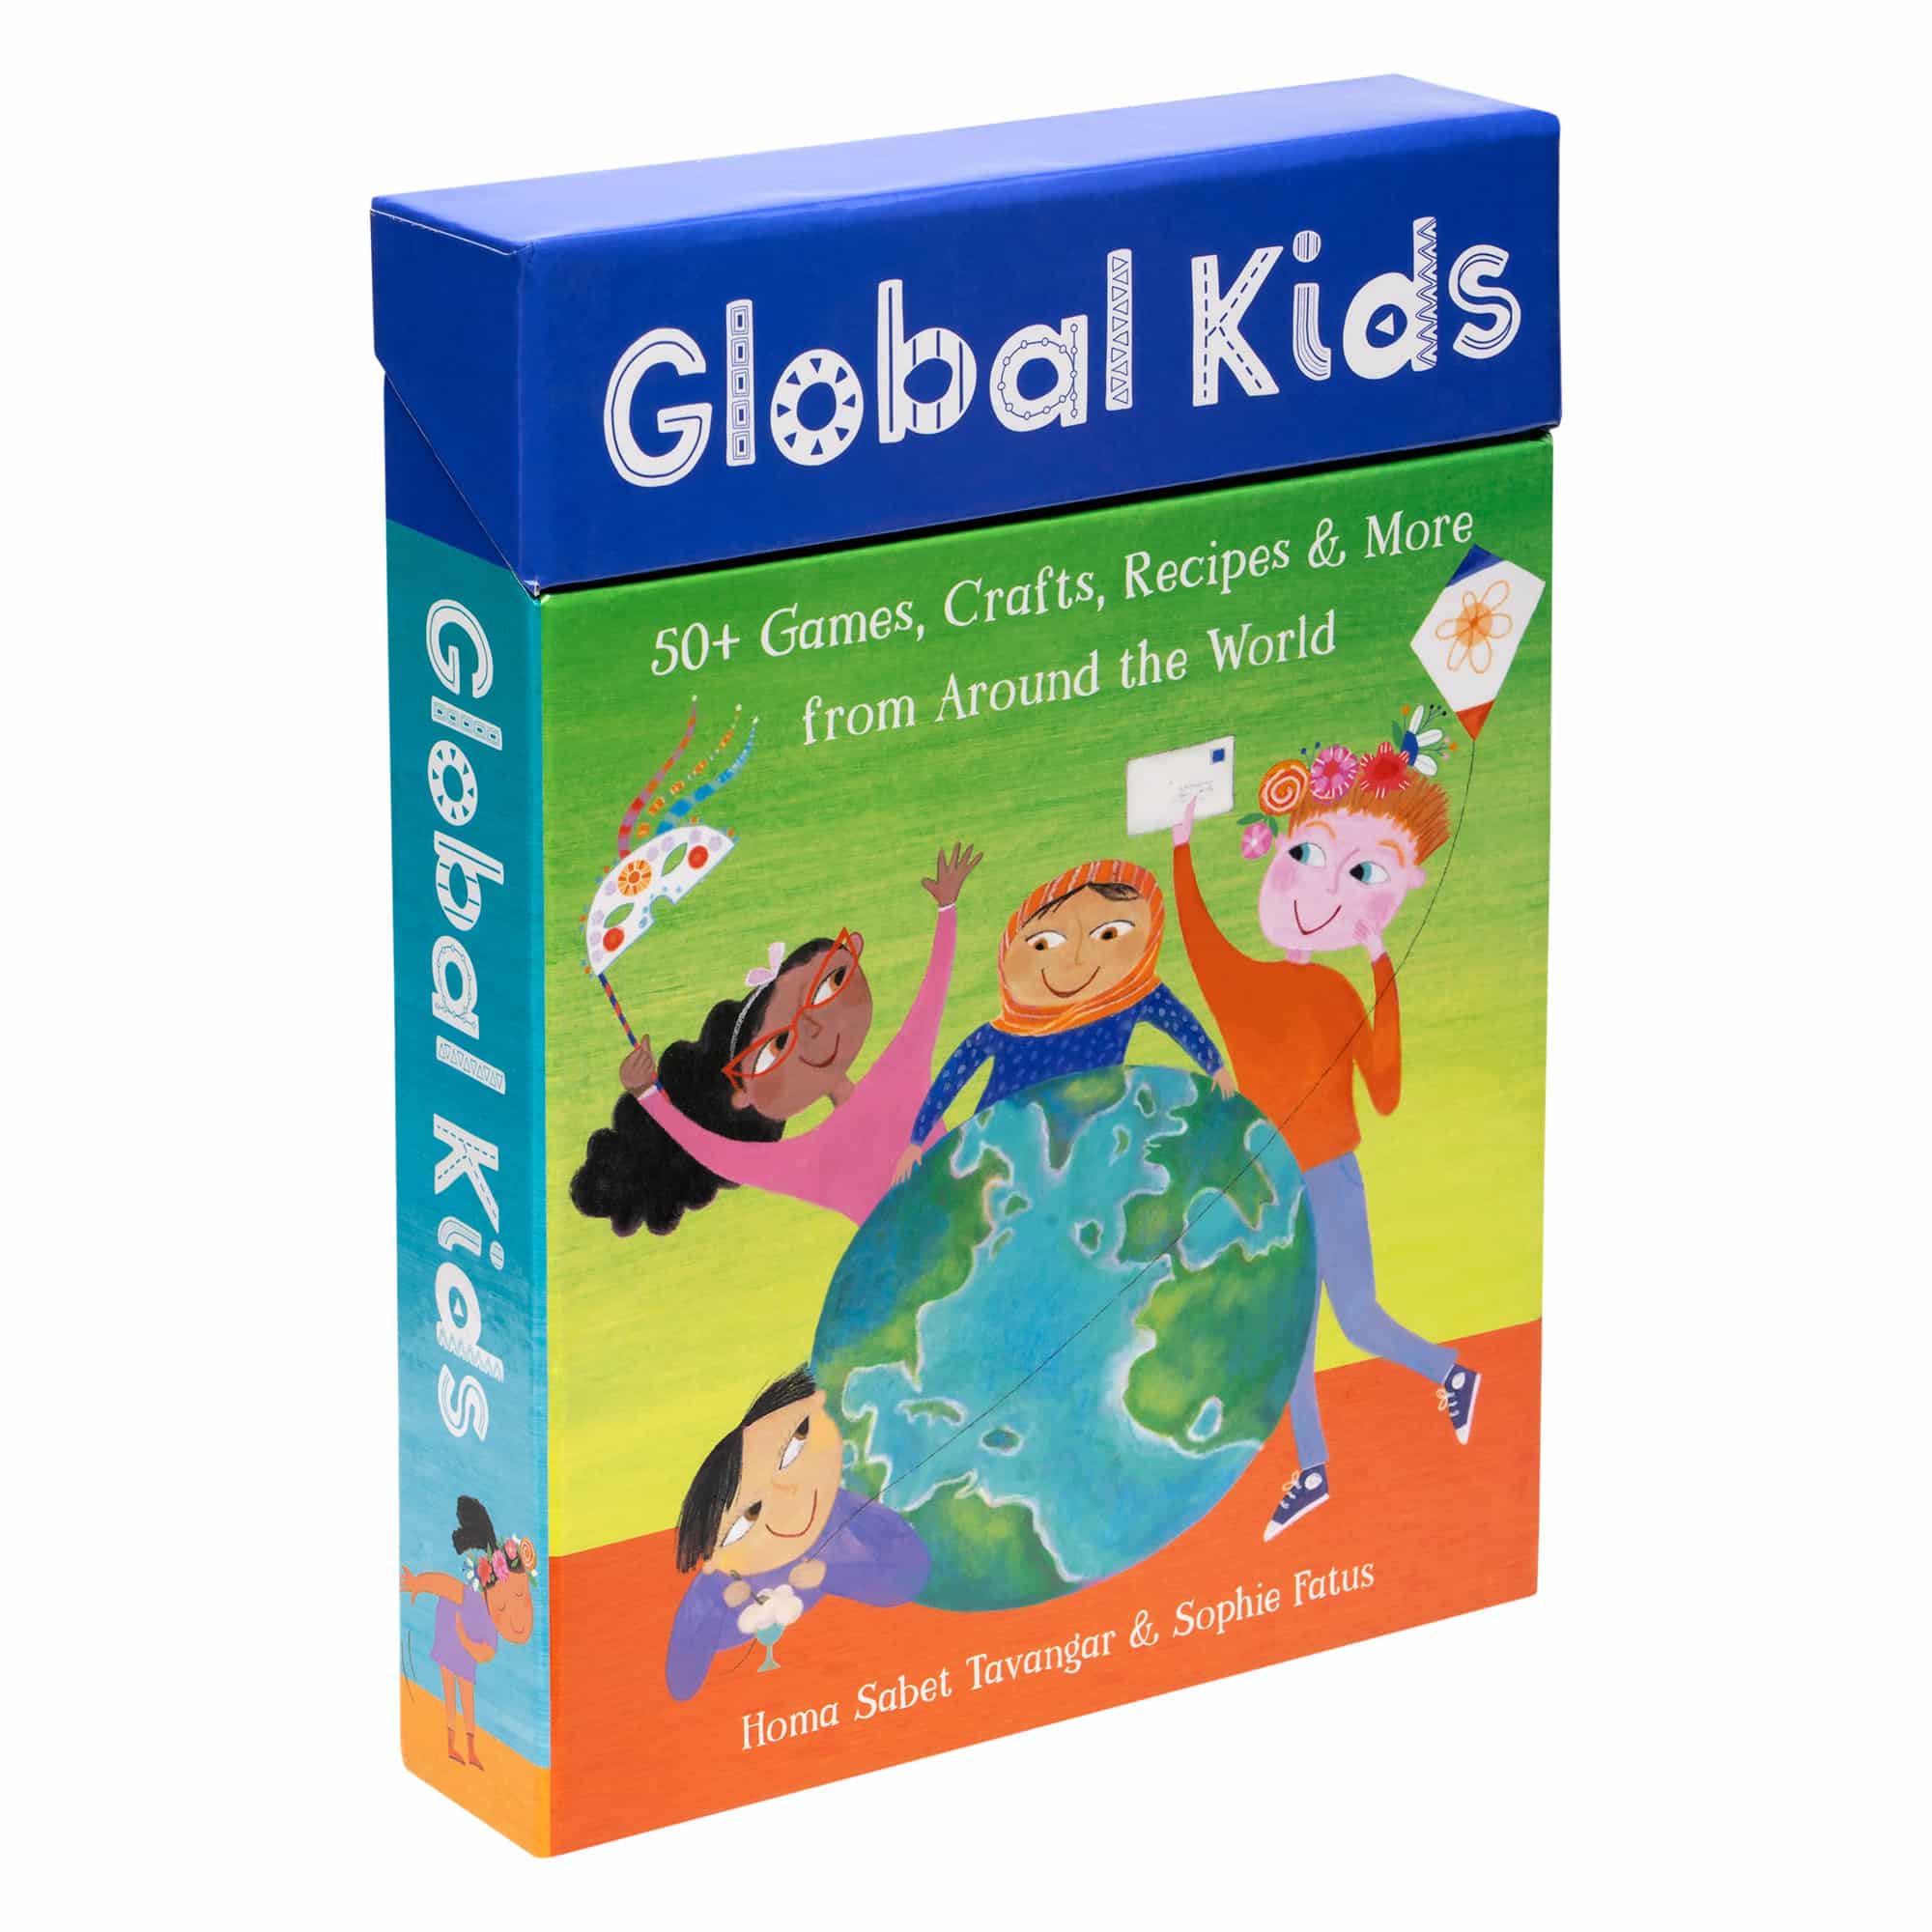 Global Kids - 50+ Games, Crafts, Recipes & More from Around the World